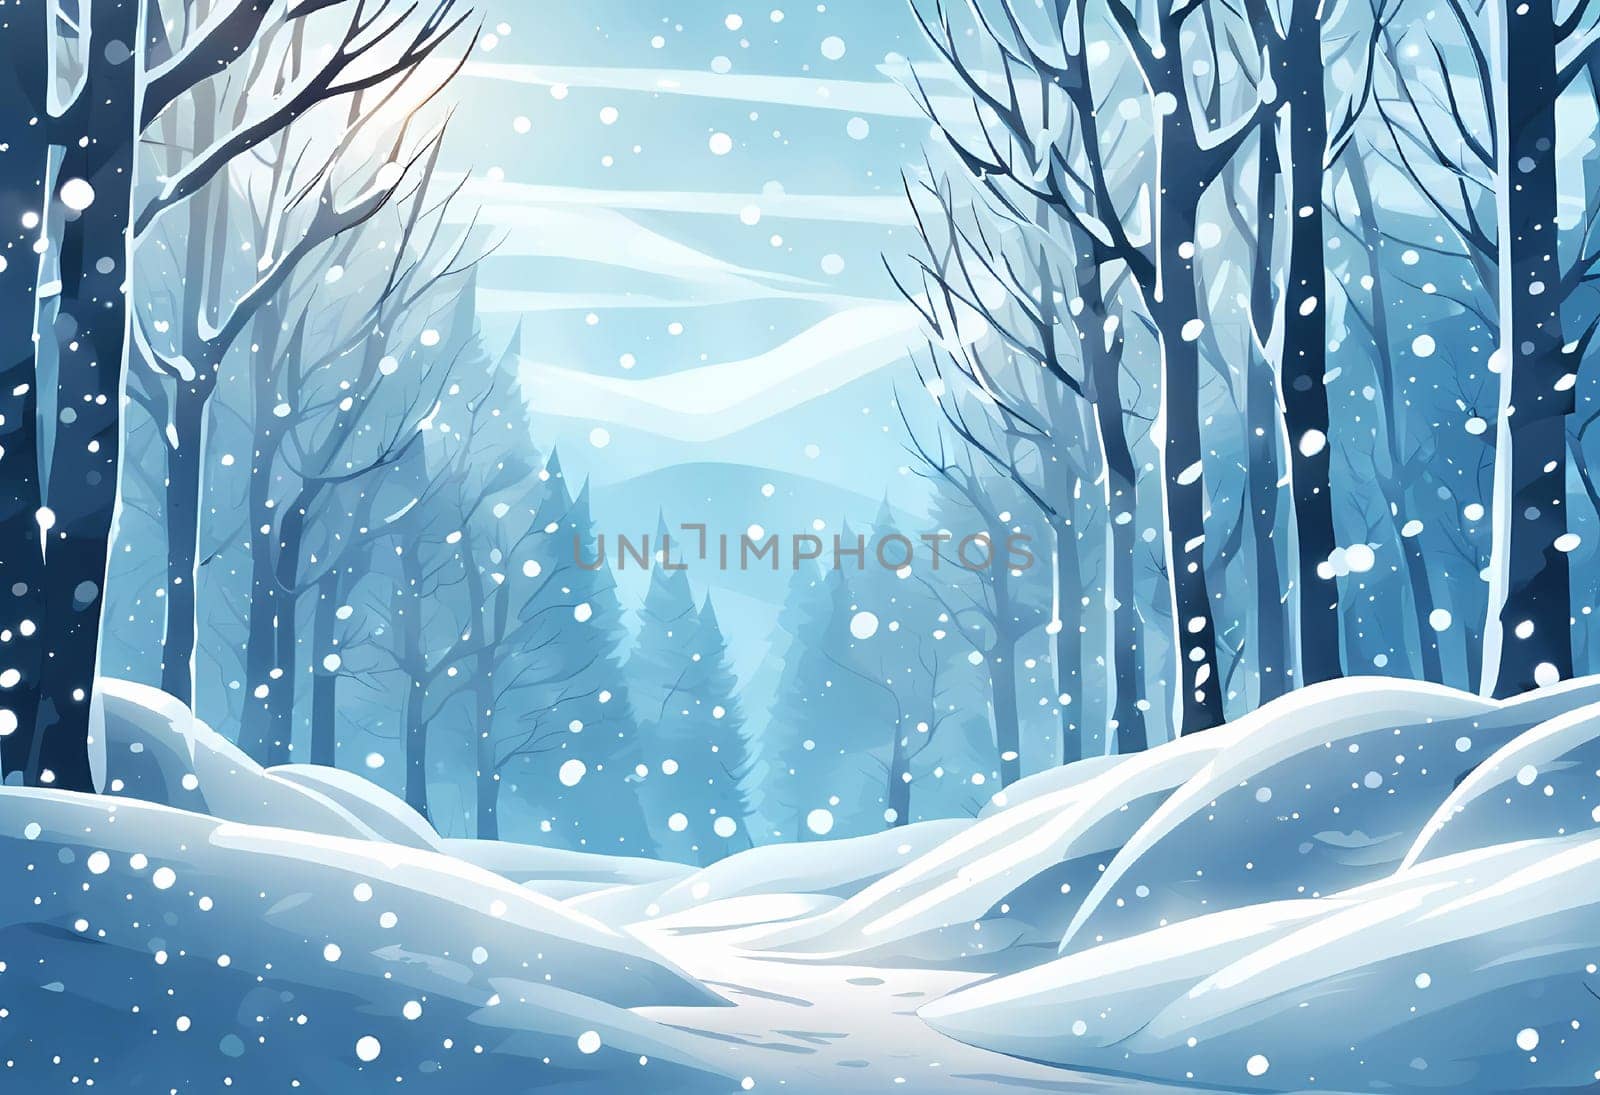 Background illustration for winter design. Holiday element in snowy frosty landscape. Snowfall in the winter forest. Anime style by rostik924